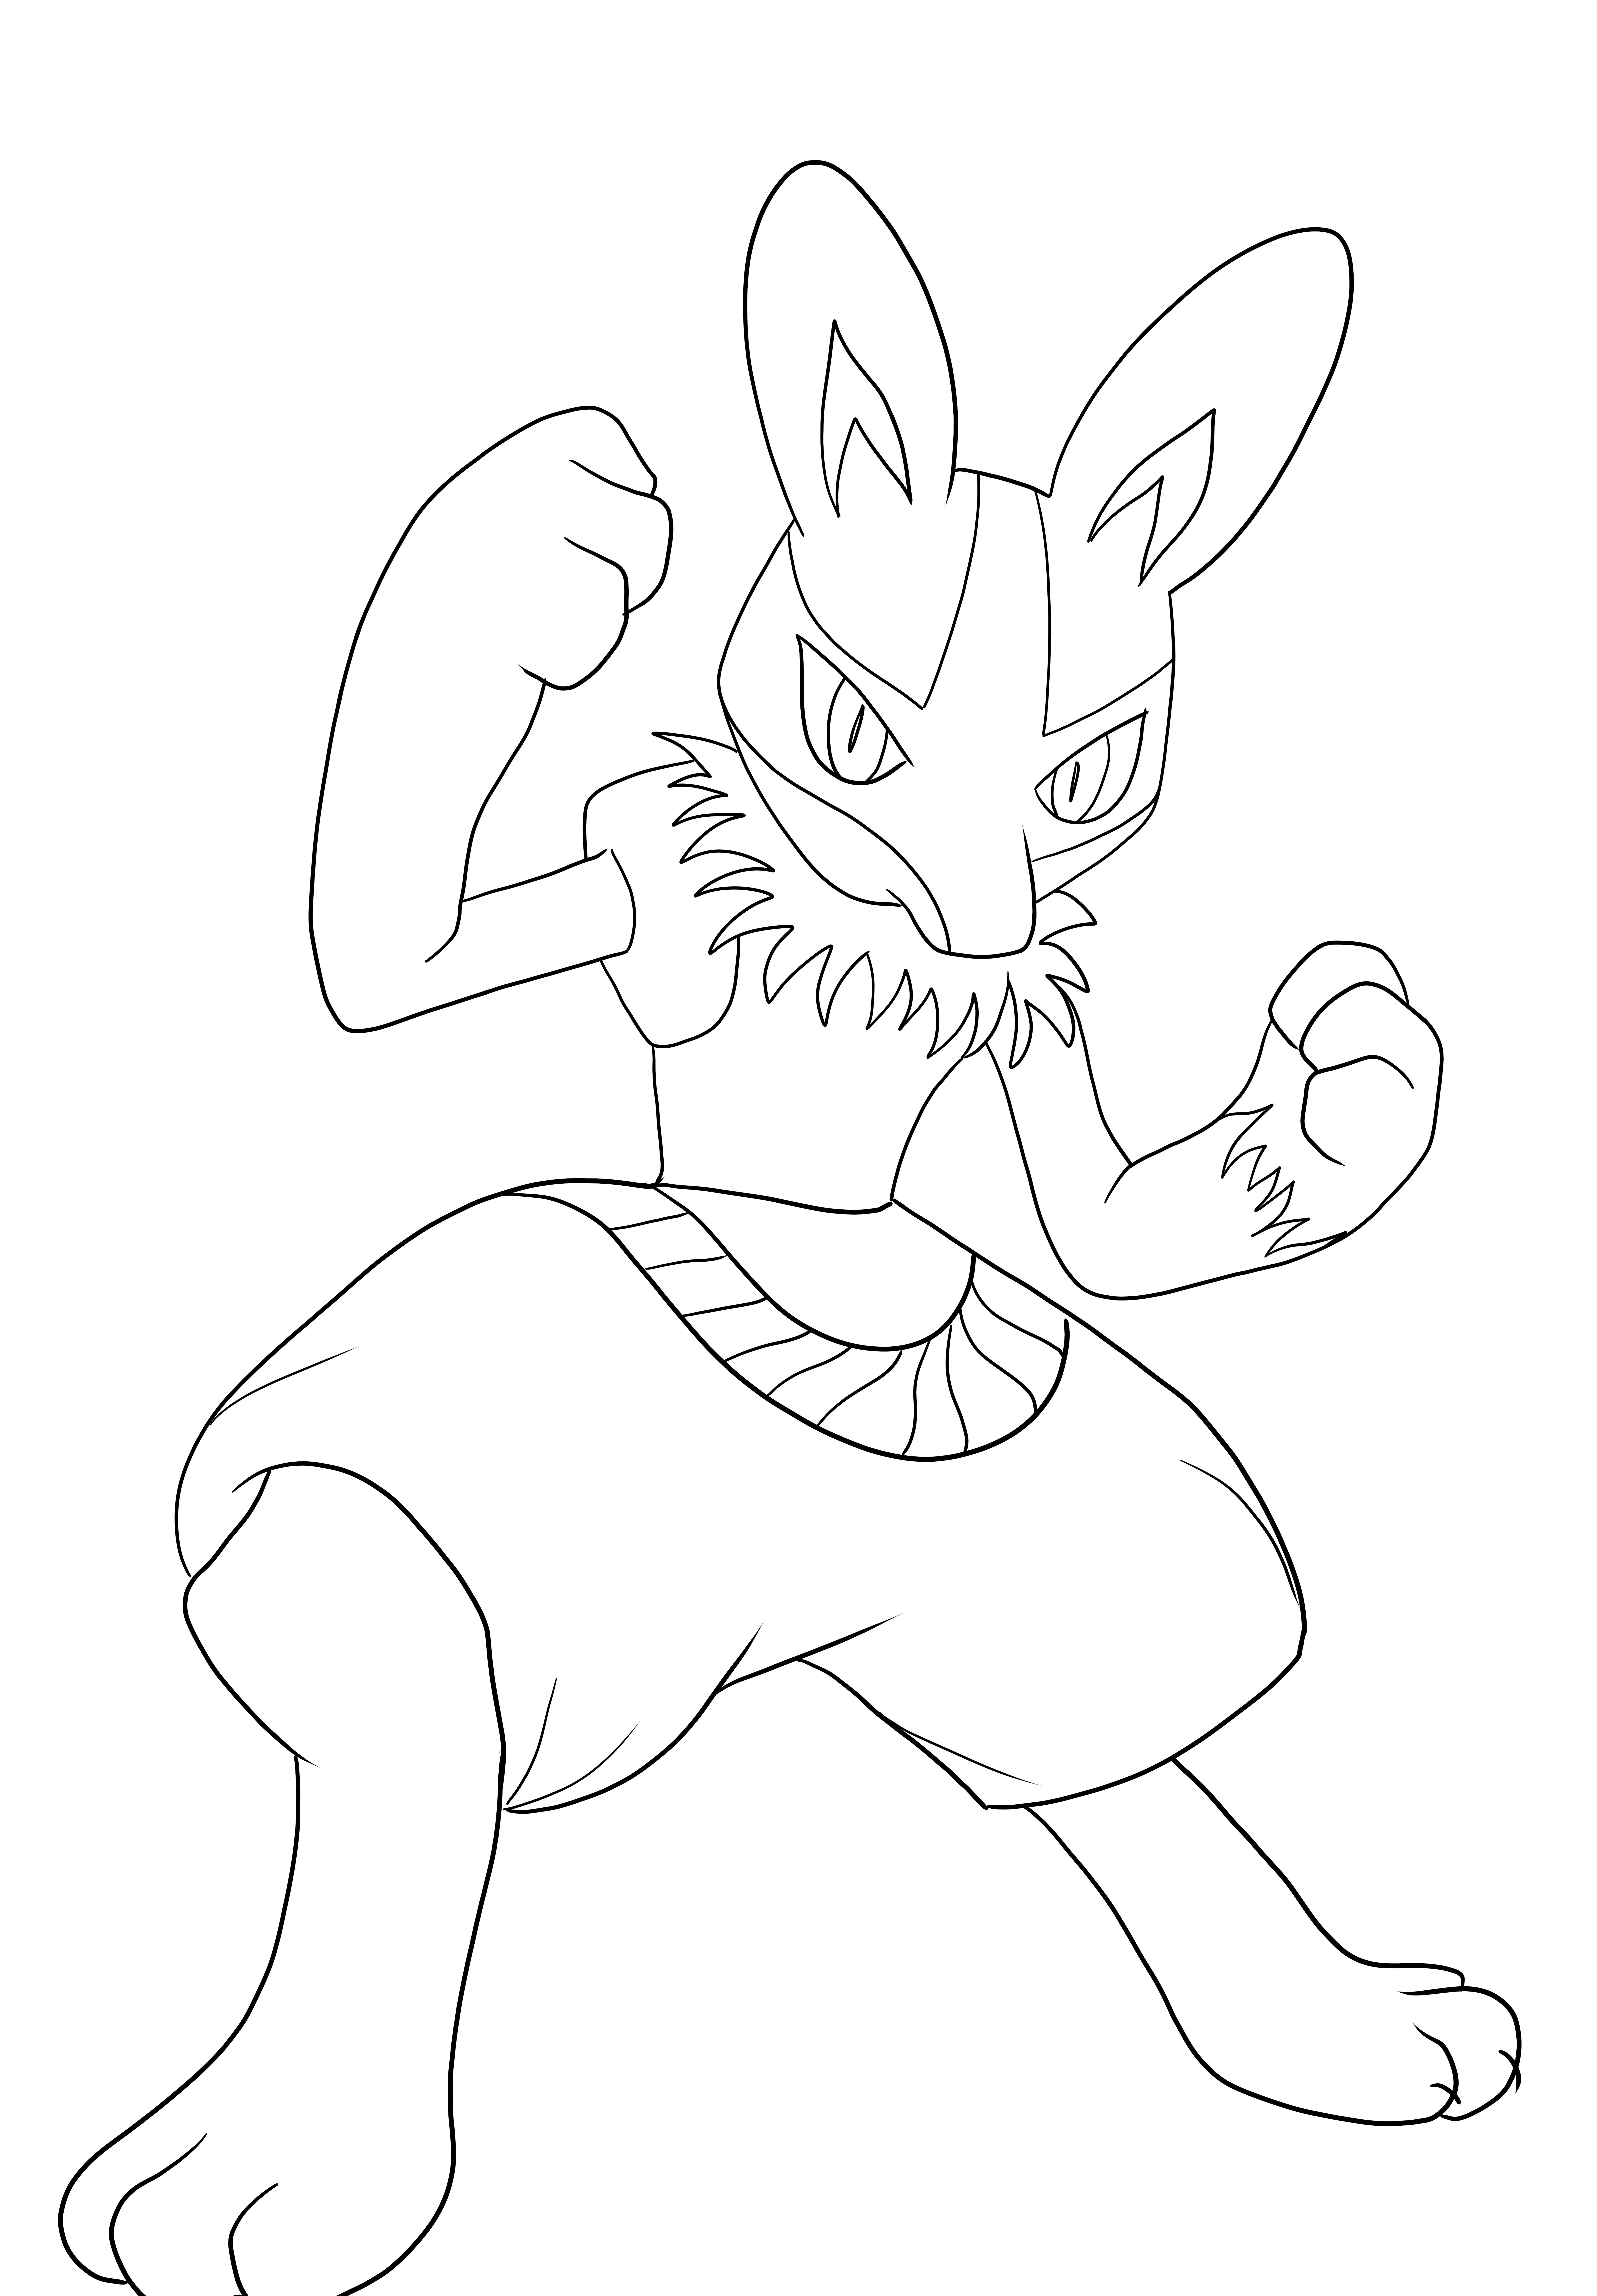 Lucario from Pokémon game to color and free to download page